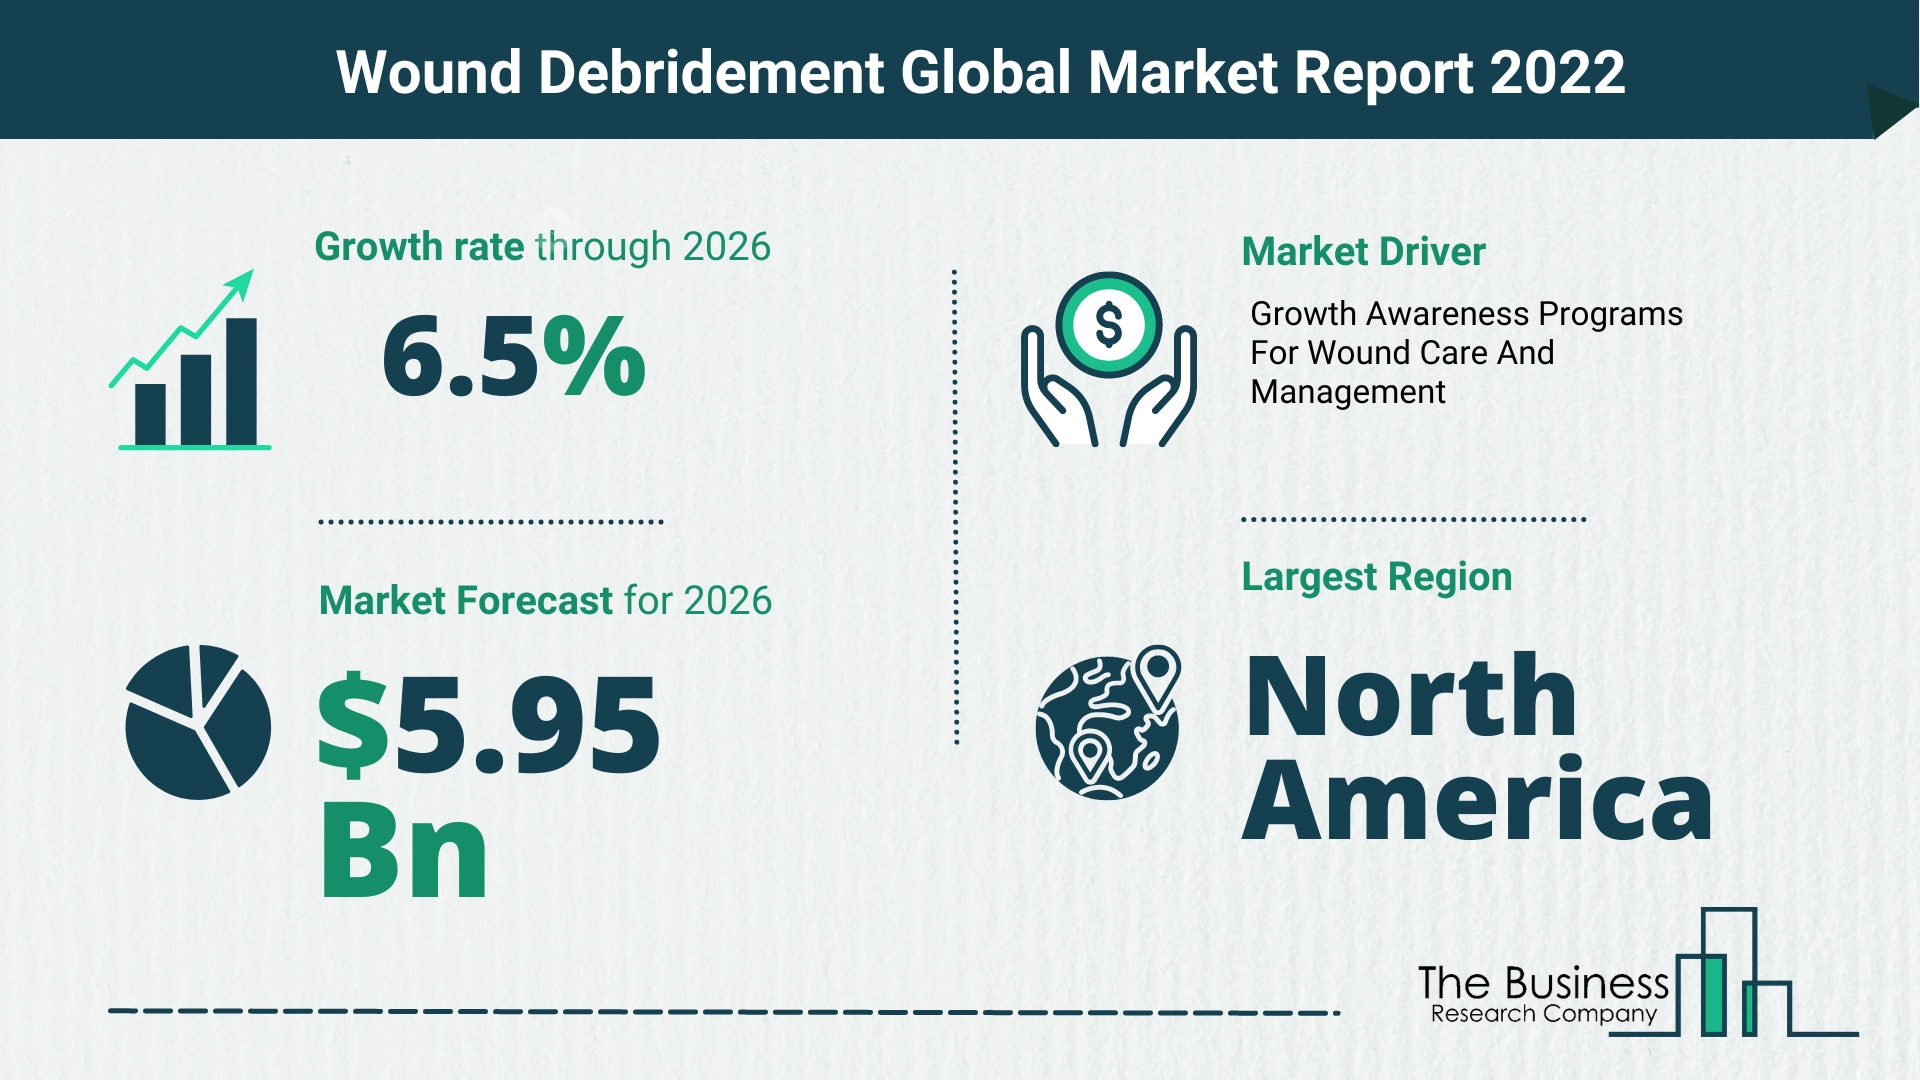 How Will The Wound Debridement Market Grow In 2022?